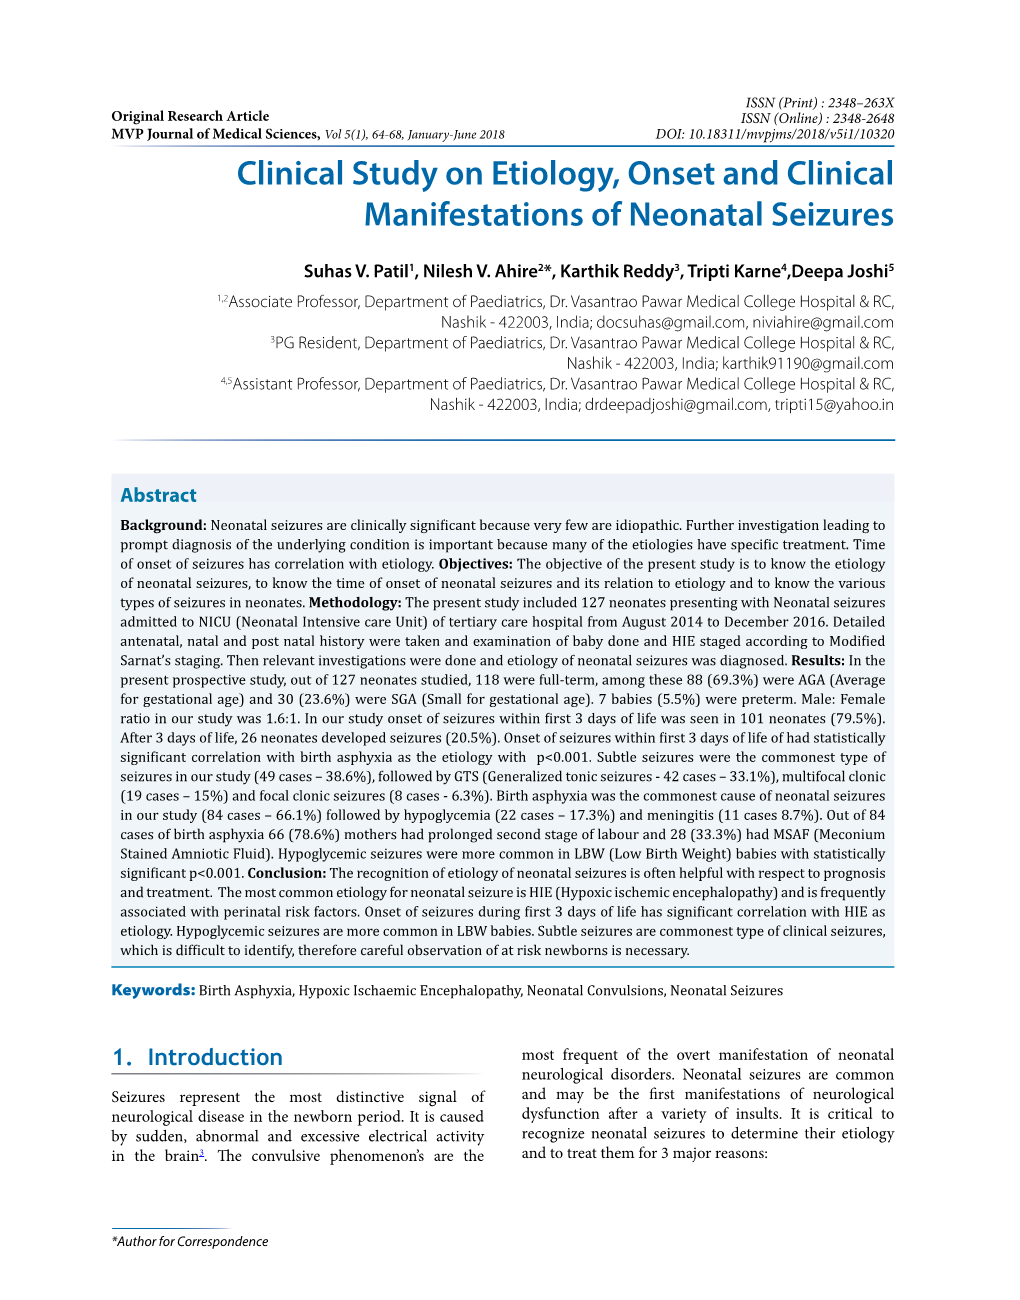 Clinical Study on Etiology, Onset and Clinical Manifestations of Neonatal Seizures